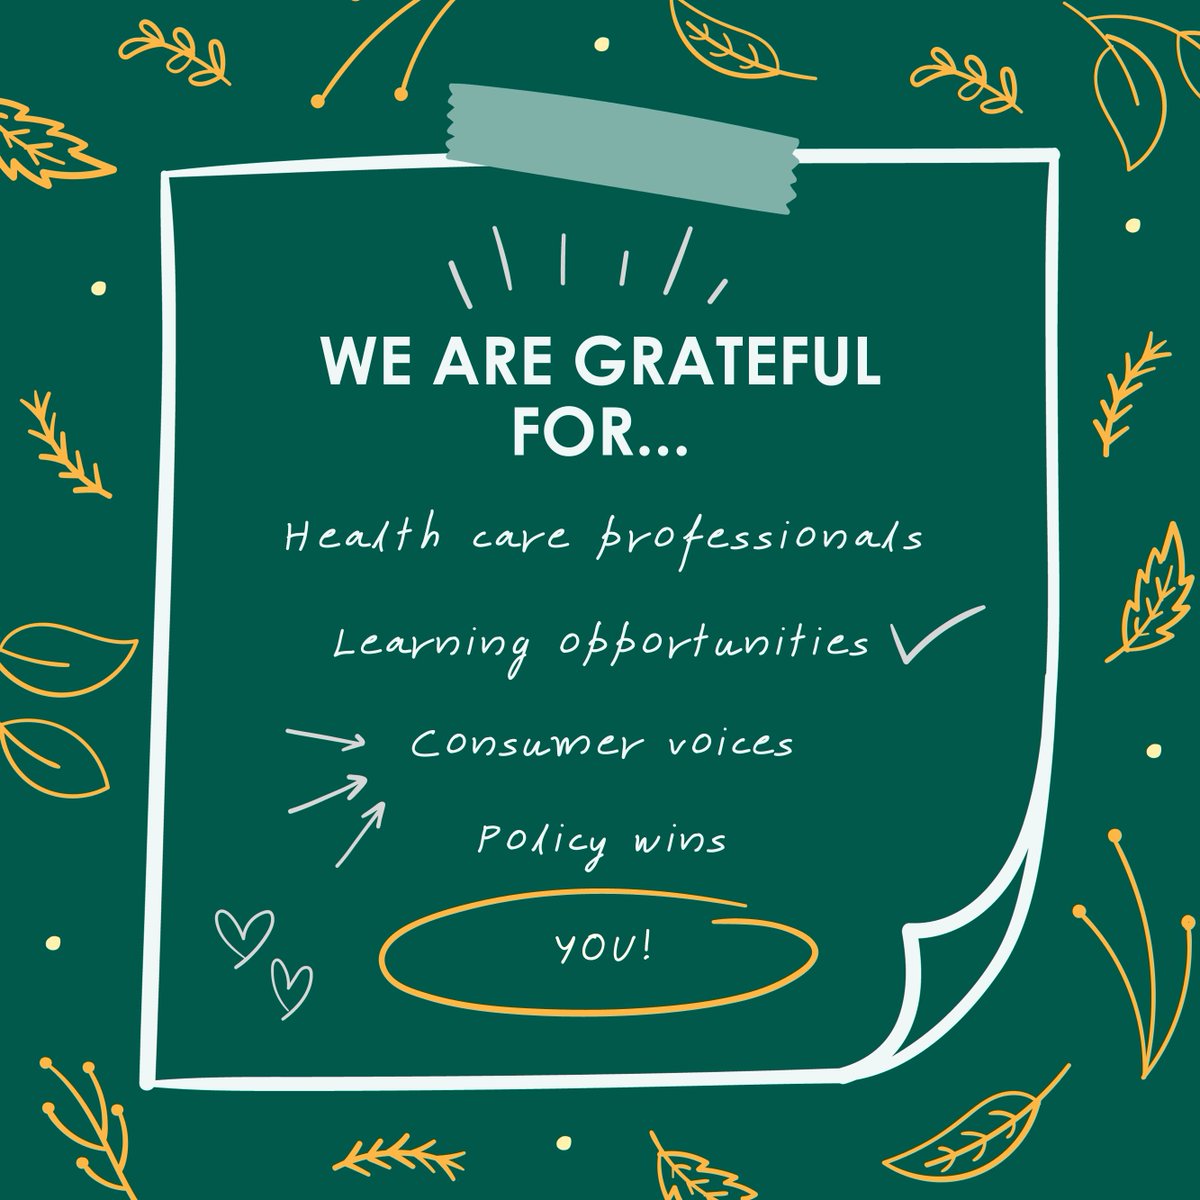 We are grateful for the individuals and organizations driving the Health Care for the Homeless movement forward. We appreciate your wisdom, your passion, and your commitment to just and equal access to high-quality health care for all. Thank you for being part of our community!